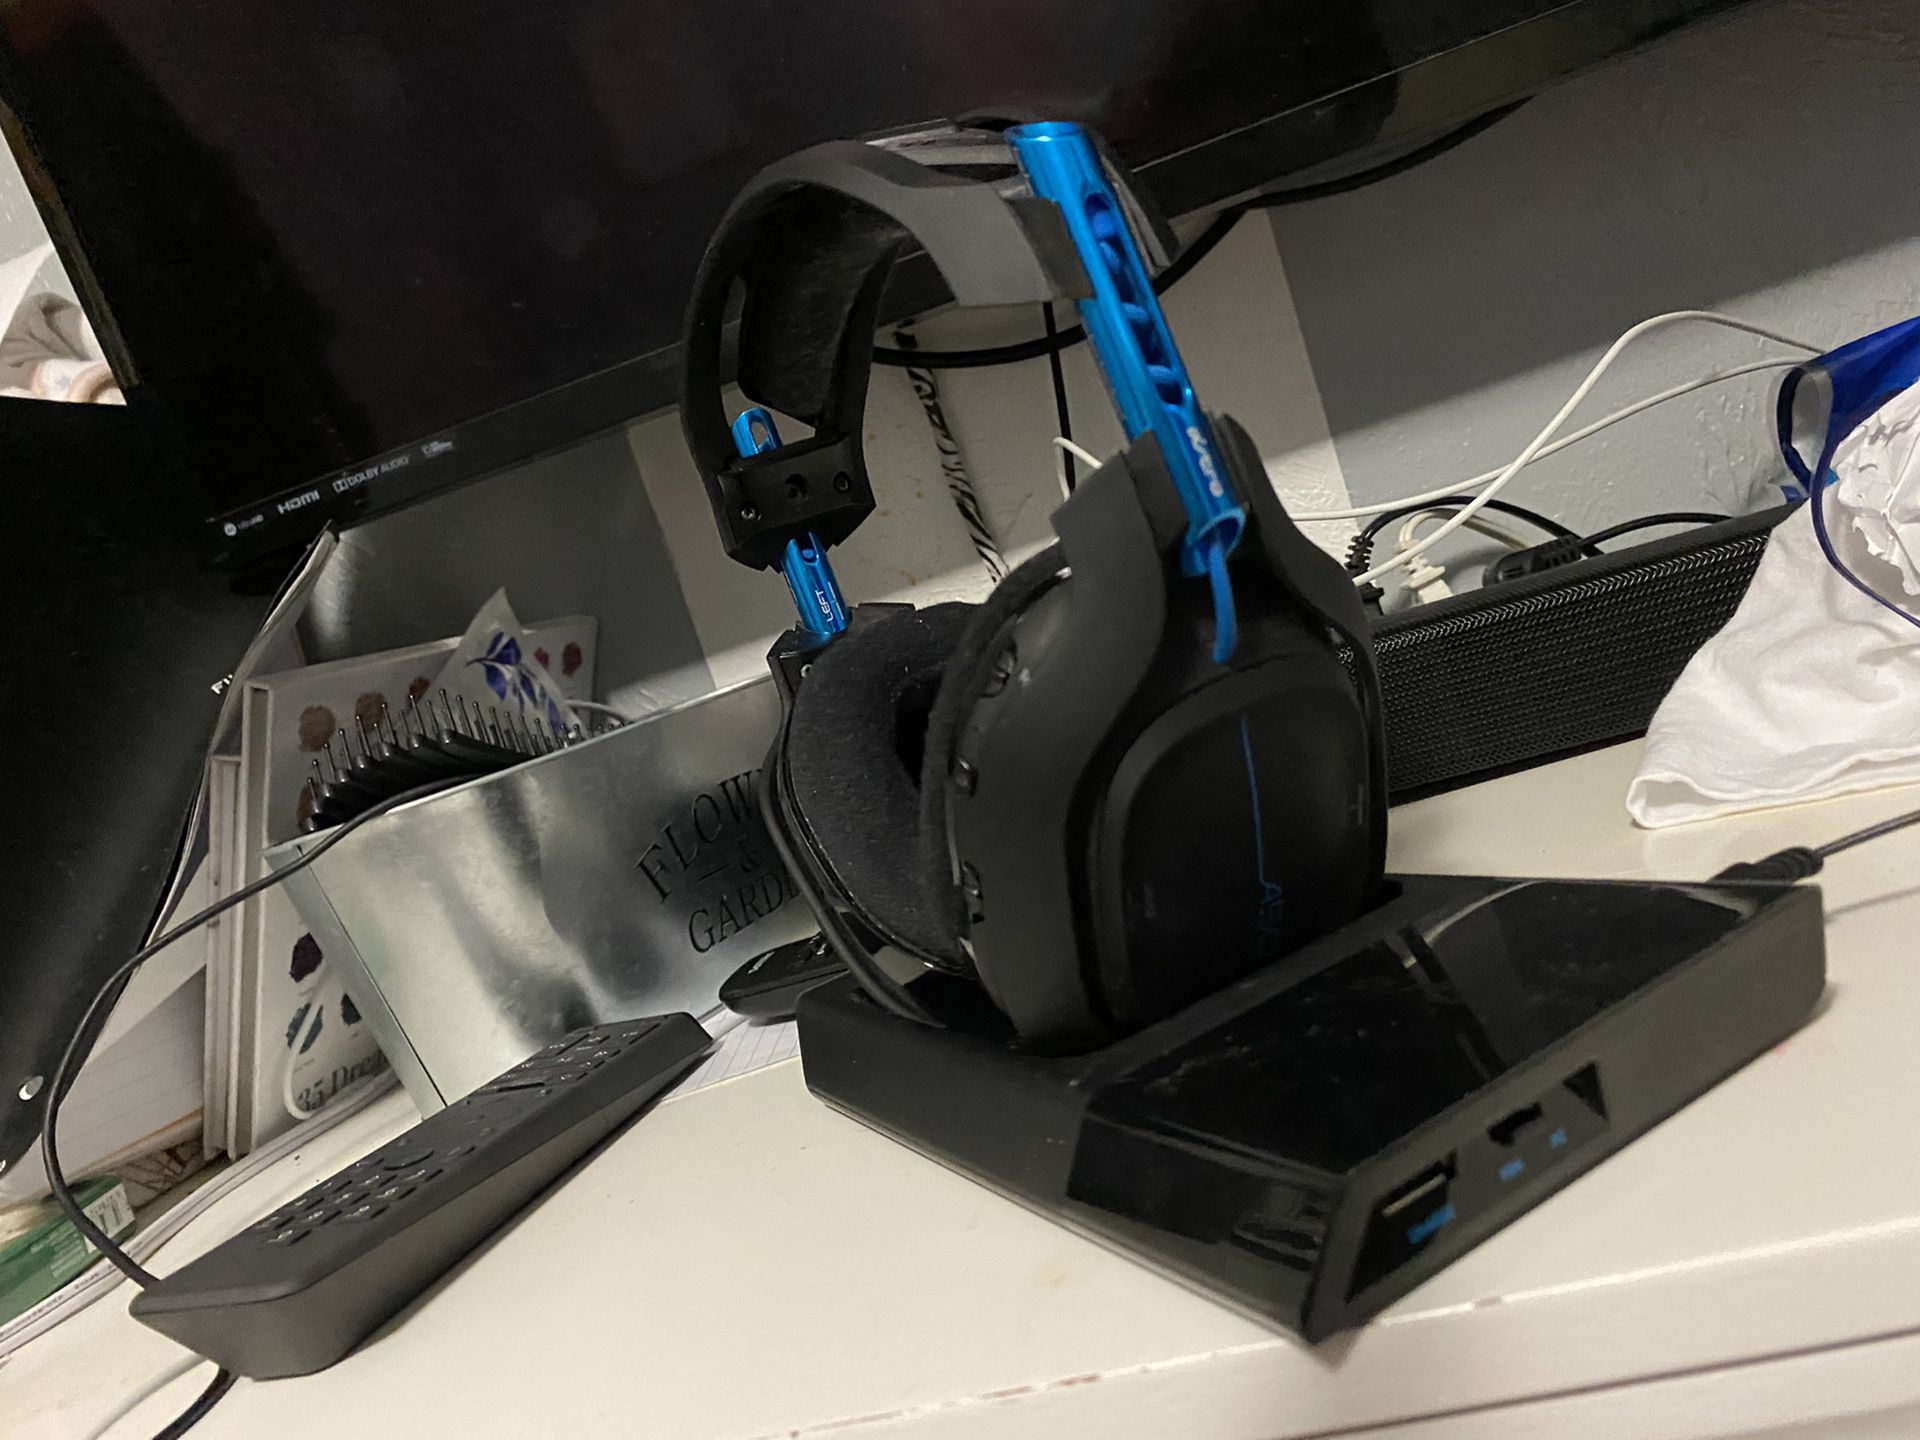 Astro A50 Bluetooth headset for PS4/PC